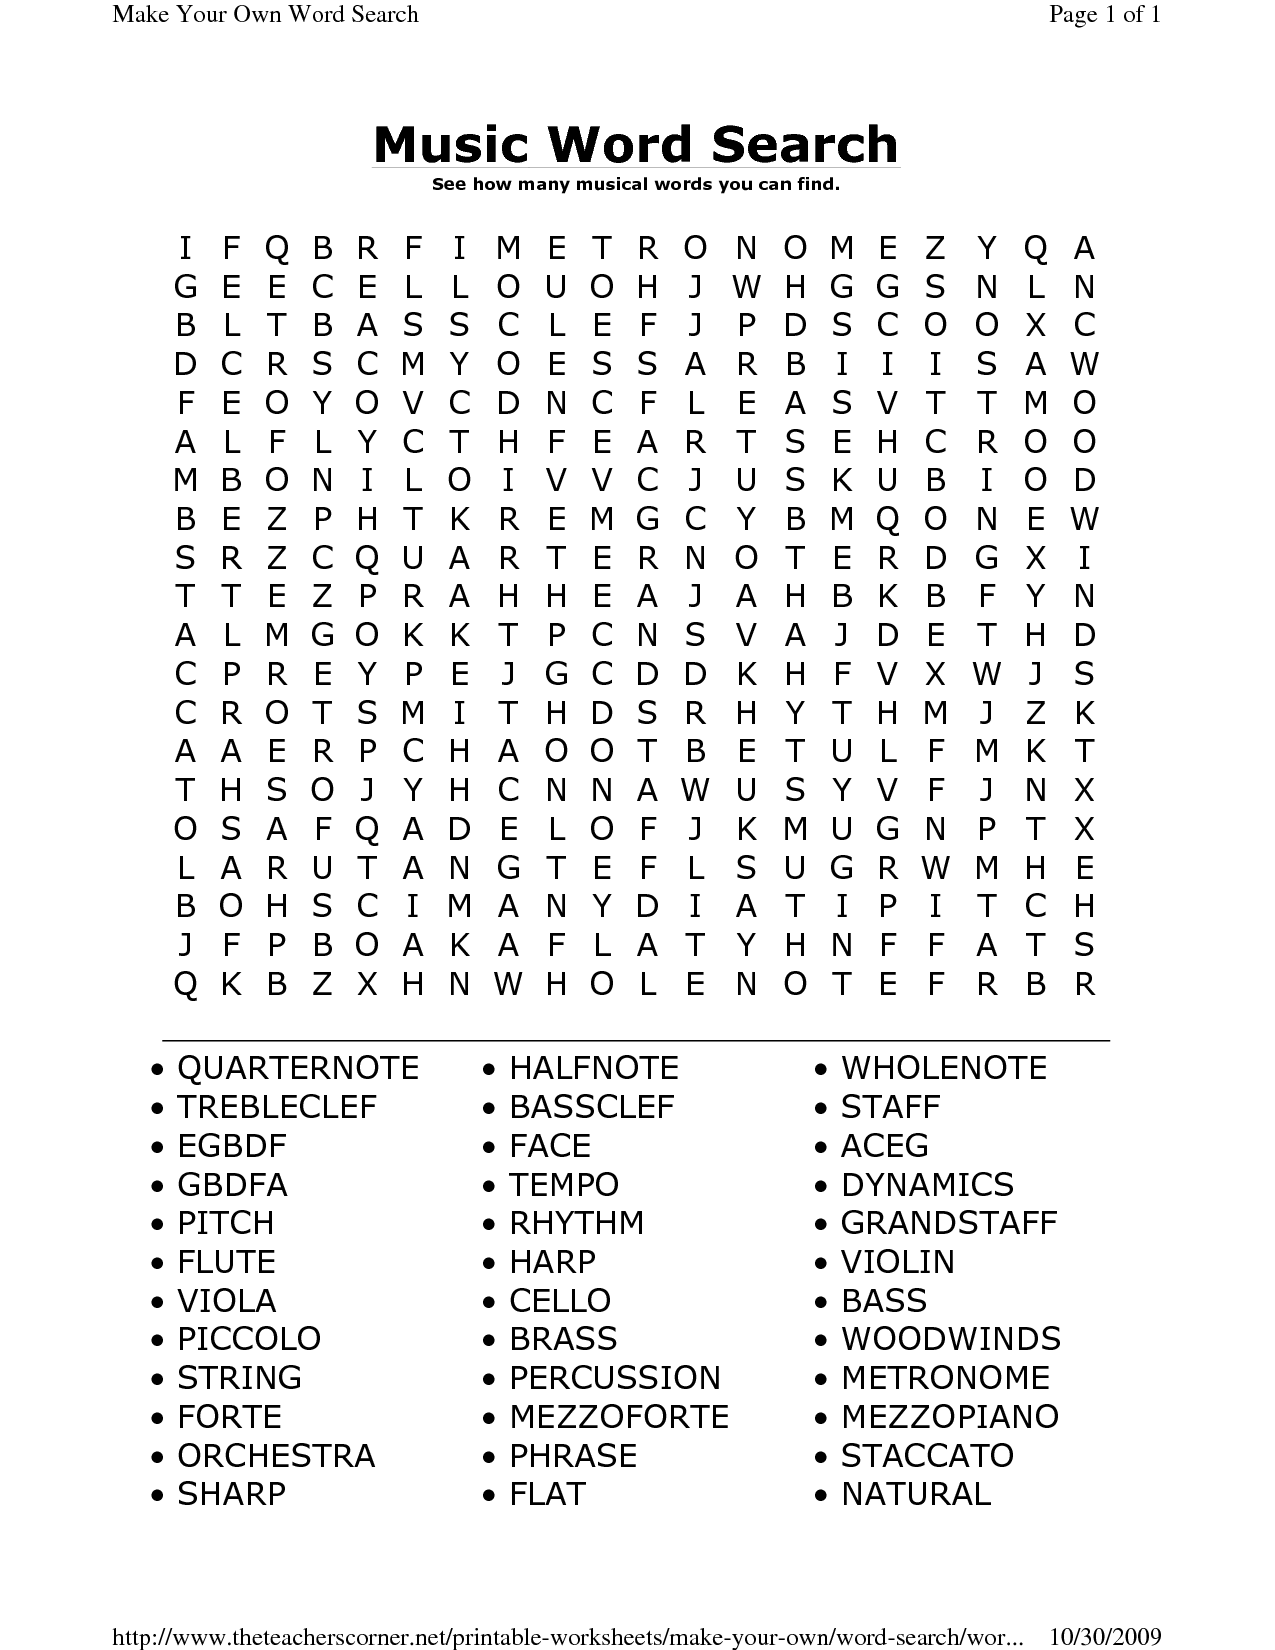 Free Printable Music Word Search Puzzles Image